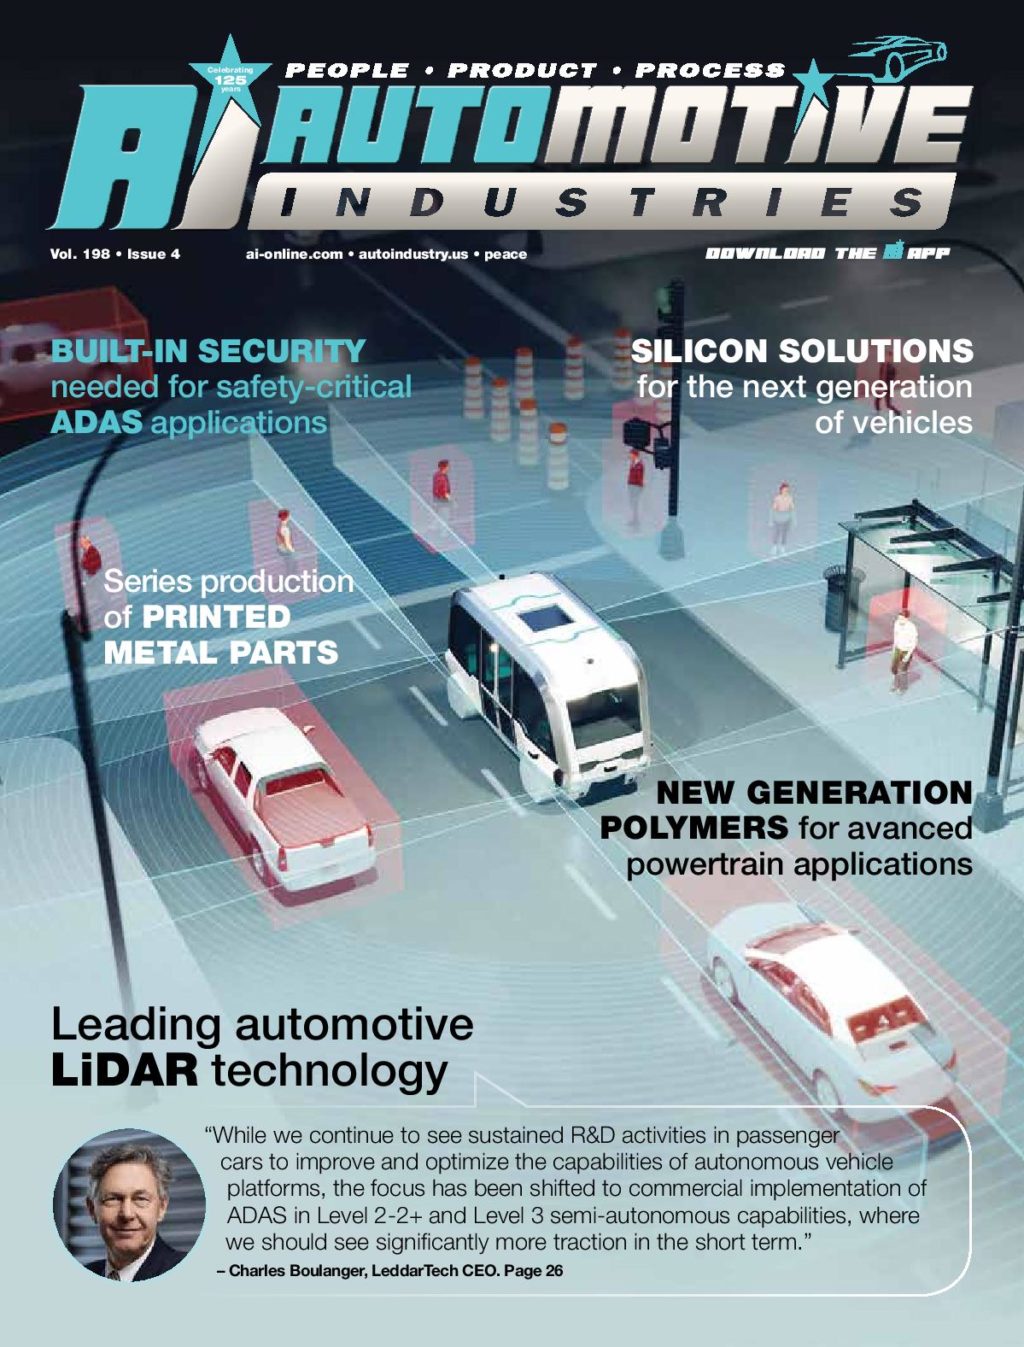 LiDAR technology comes of age